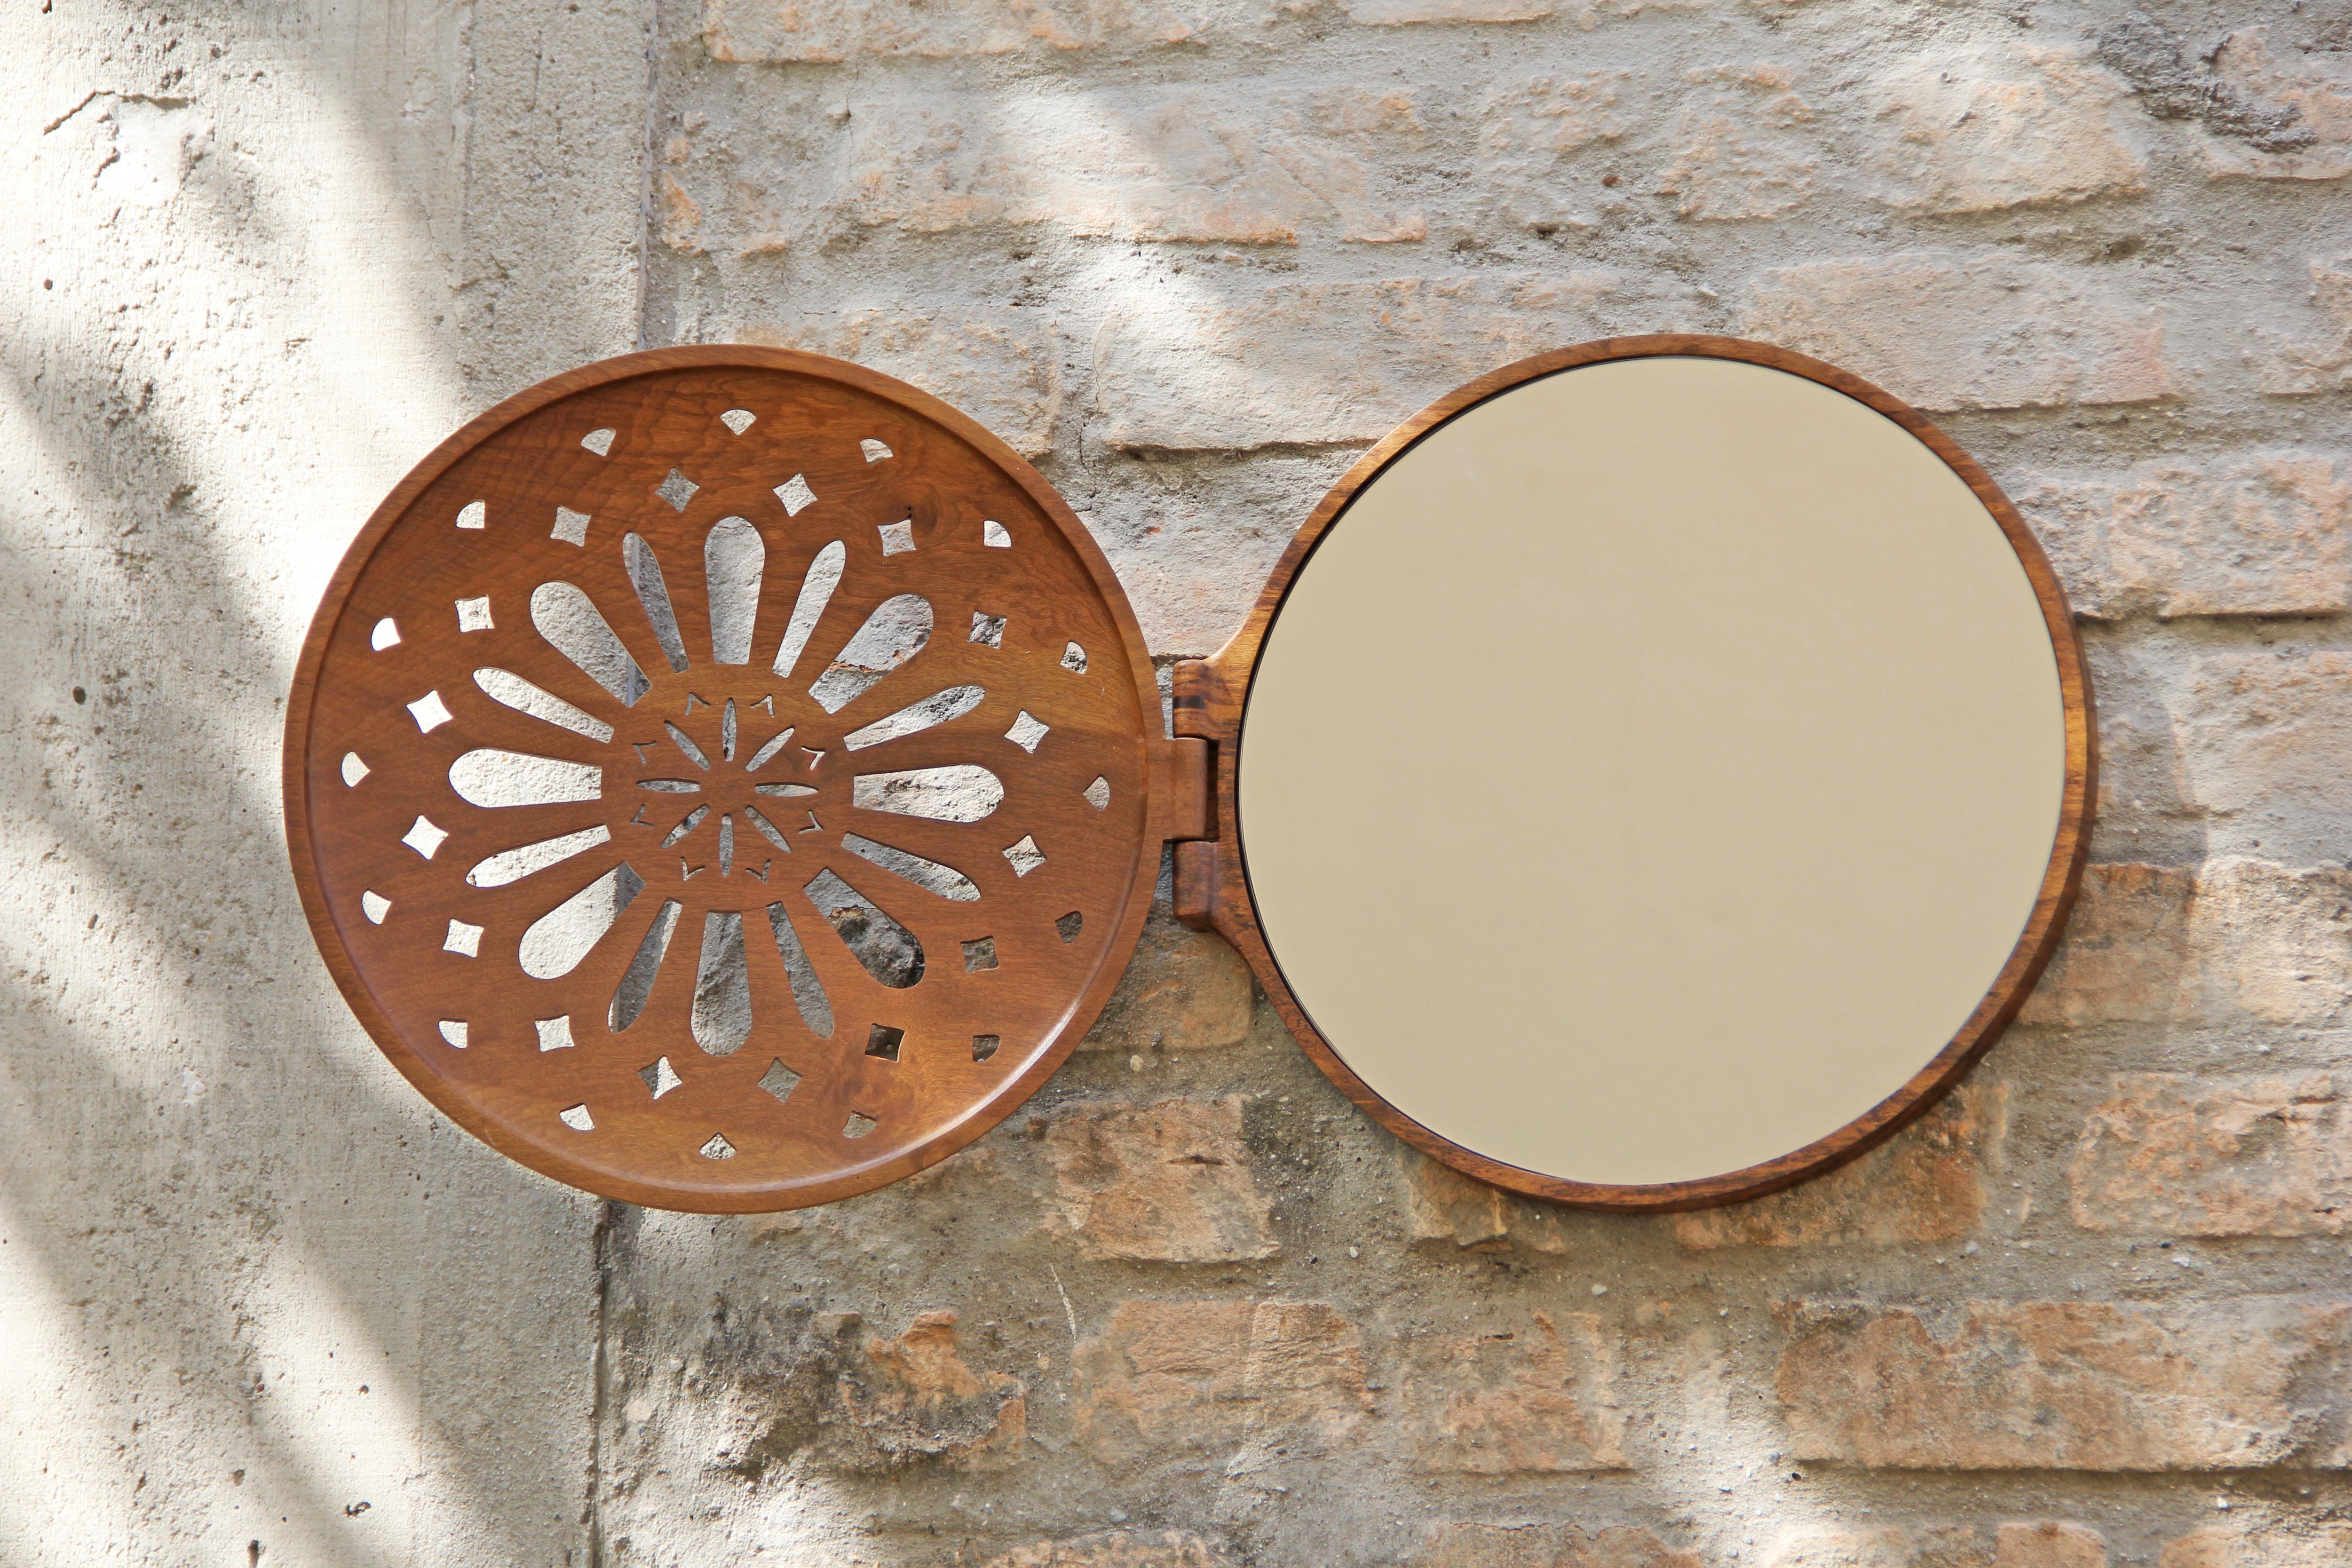 Brazilian Reliquary Mirror: made in Brazil with imbuia wood and bronze mirror For Sale